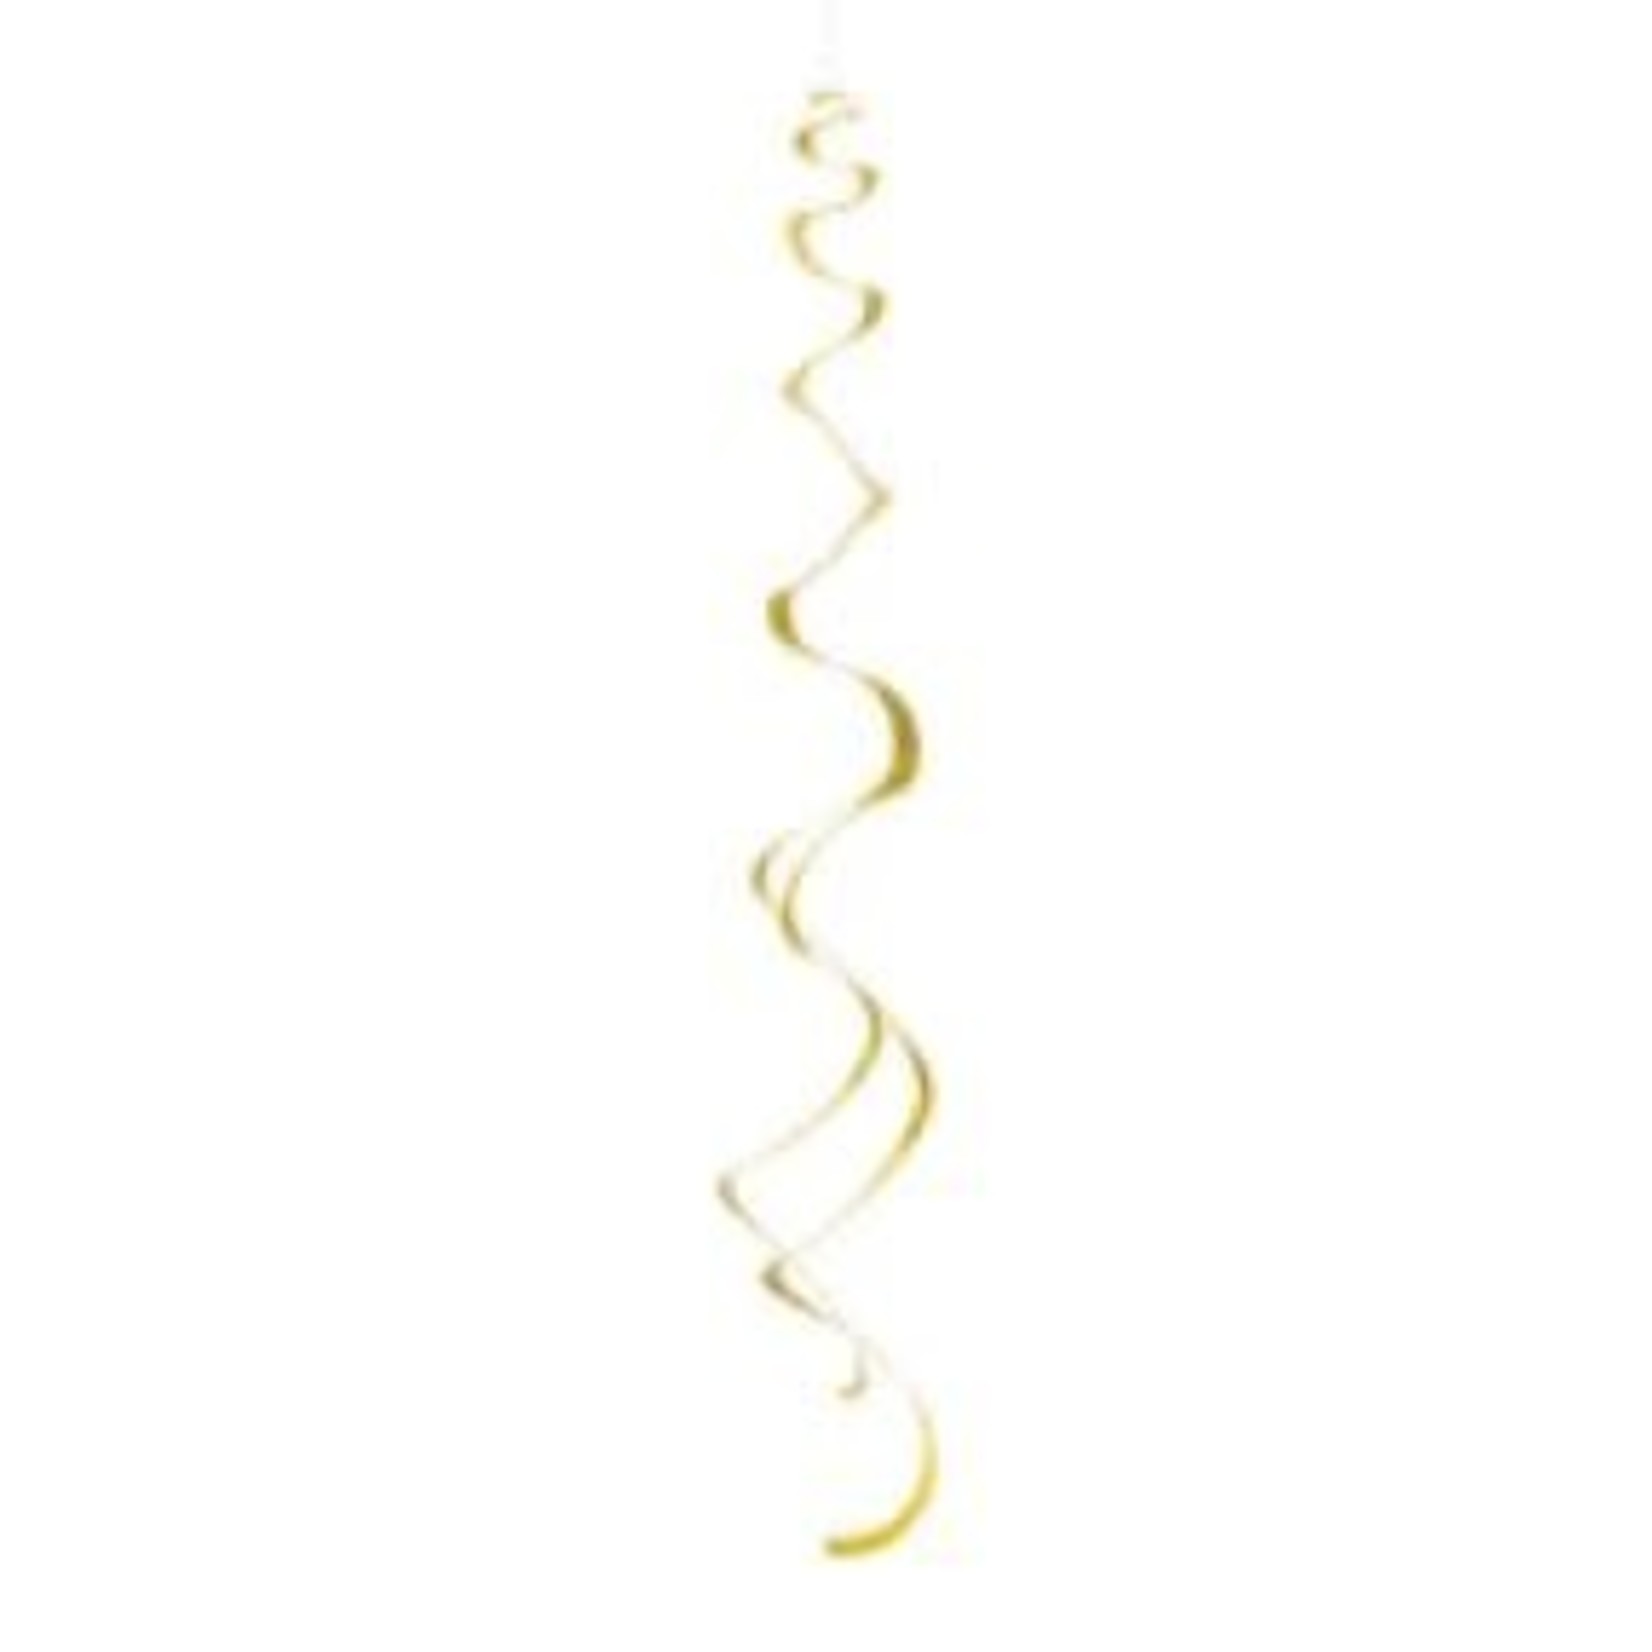 Gold Solid Hanging Swirl Decorations  8ct